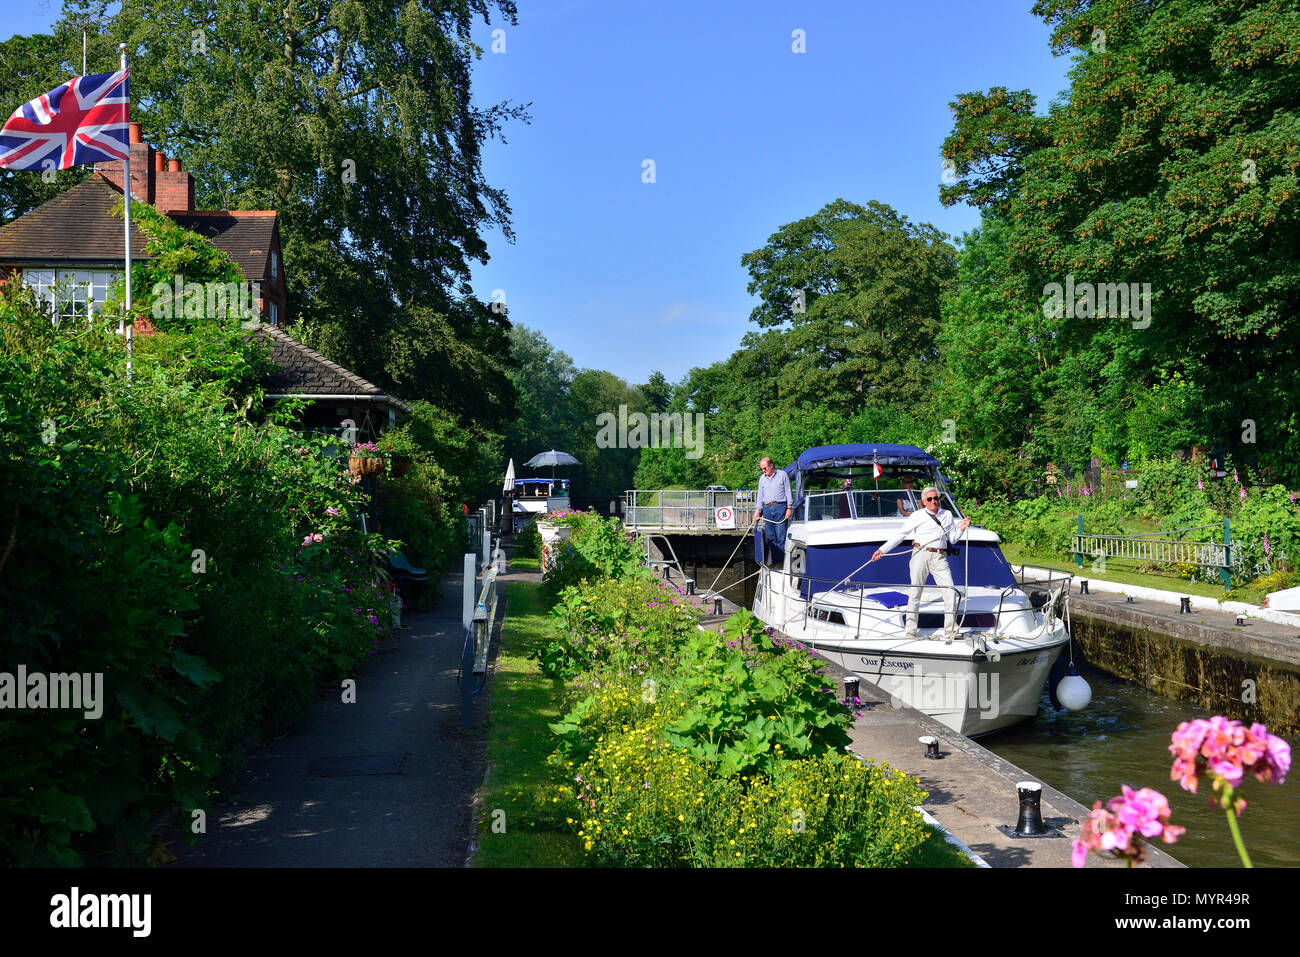 Private pleasure boat entering the Sonning Lock on the River Thames near the village of Sonning, Berkshire,on a beauiful sunny summers afternoon Stock Photo